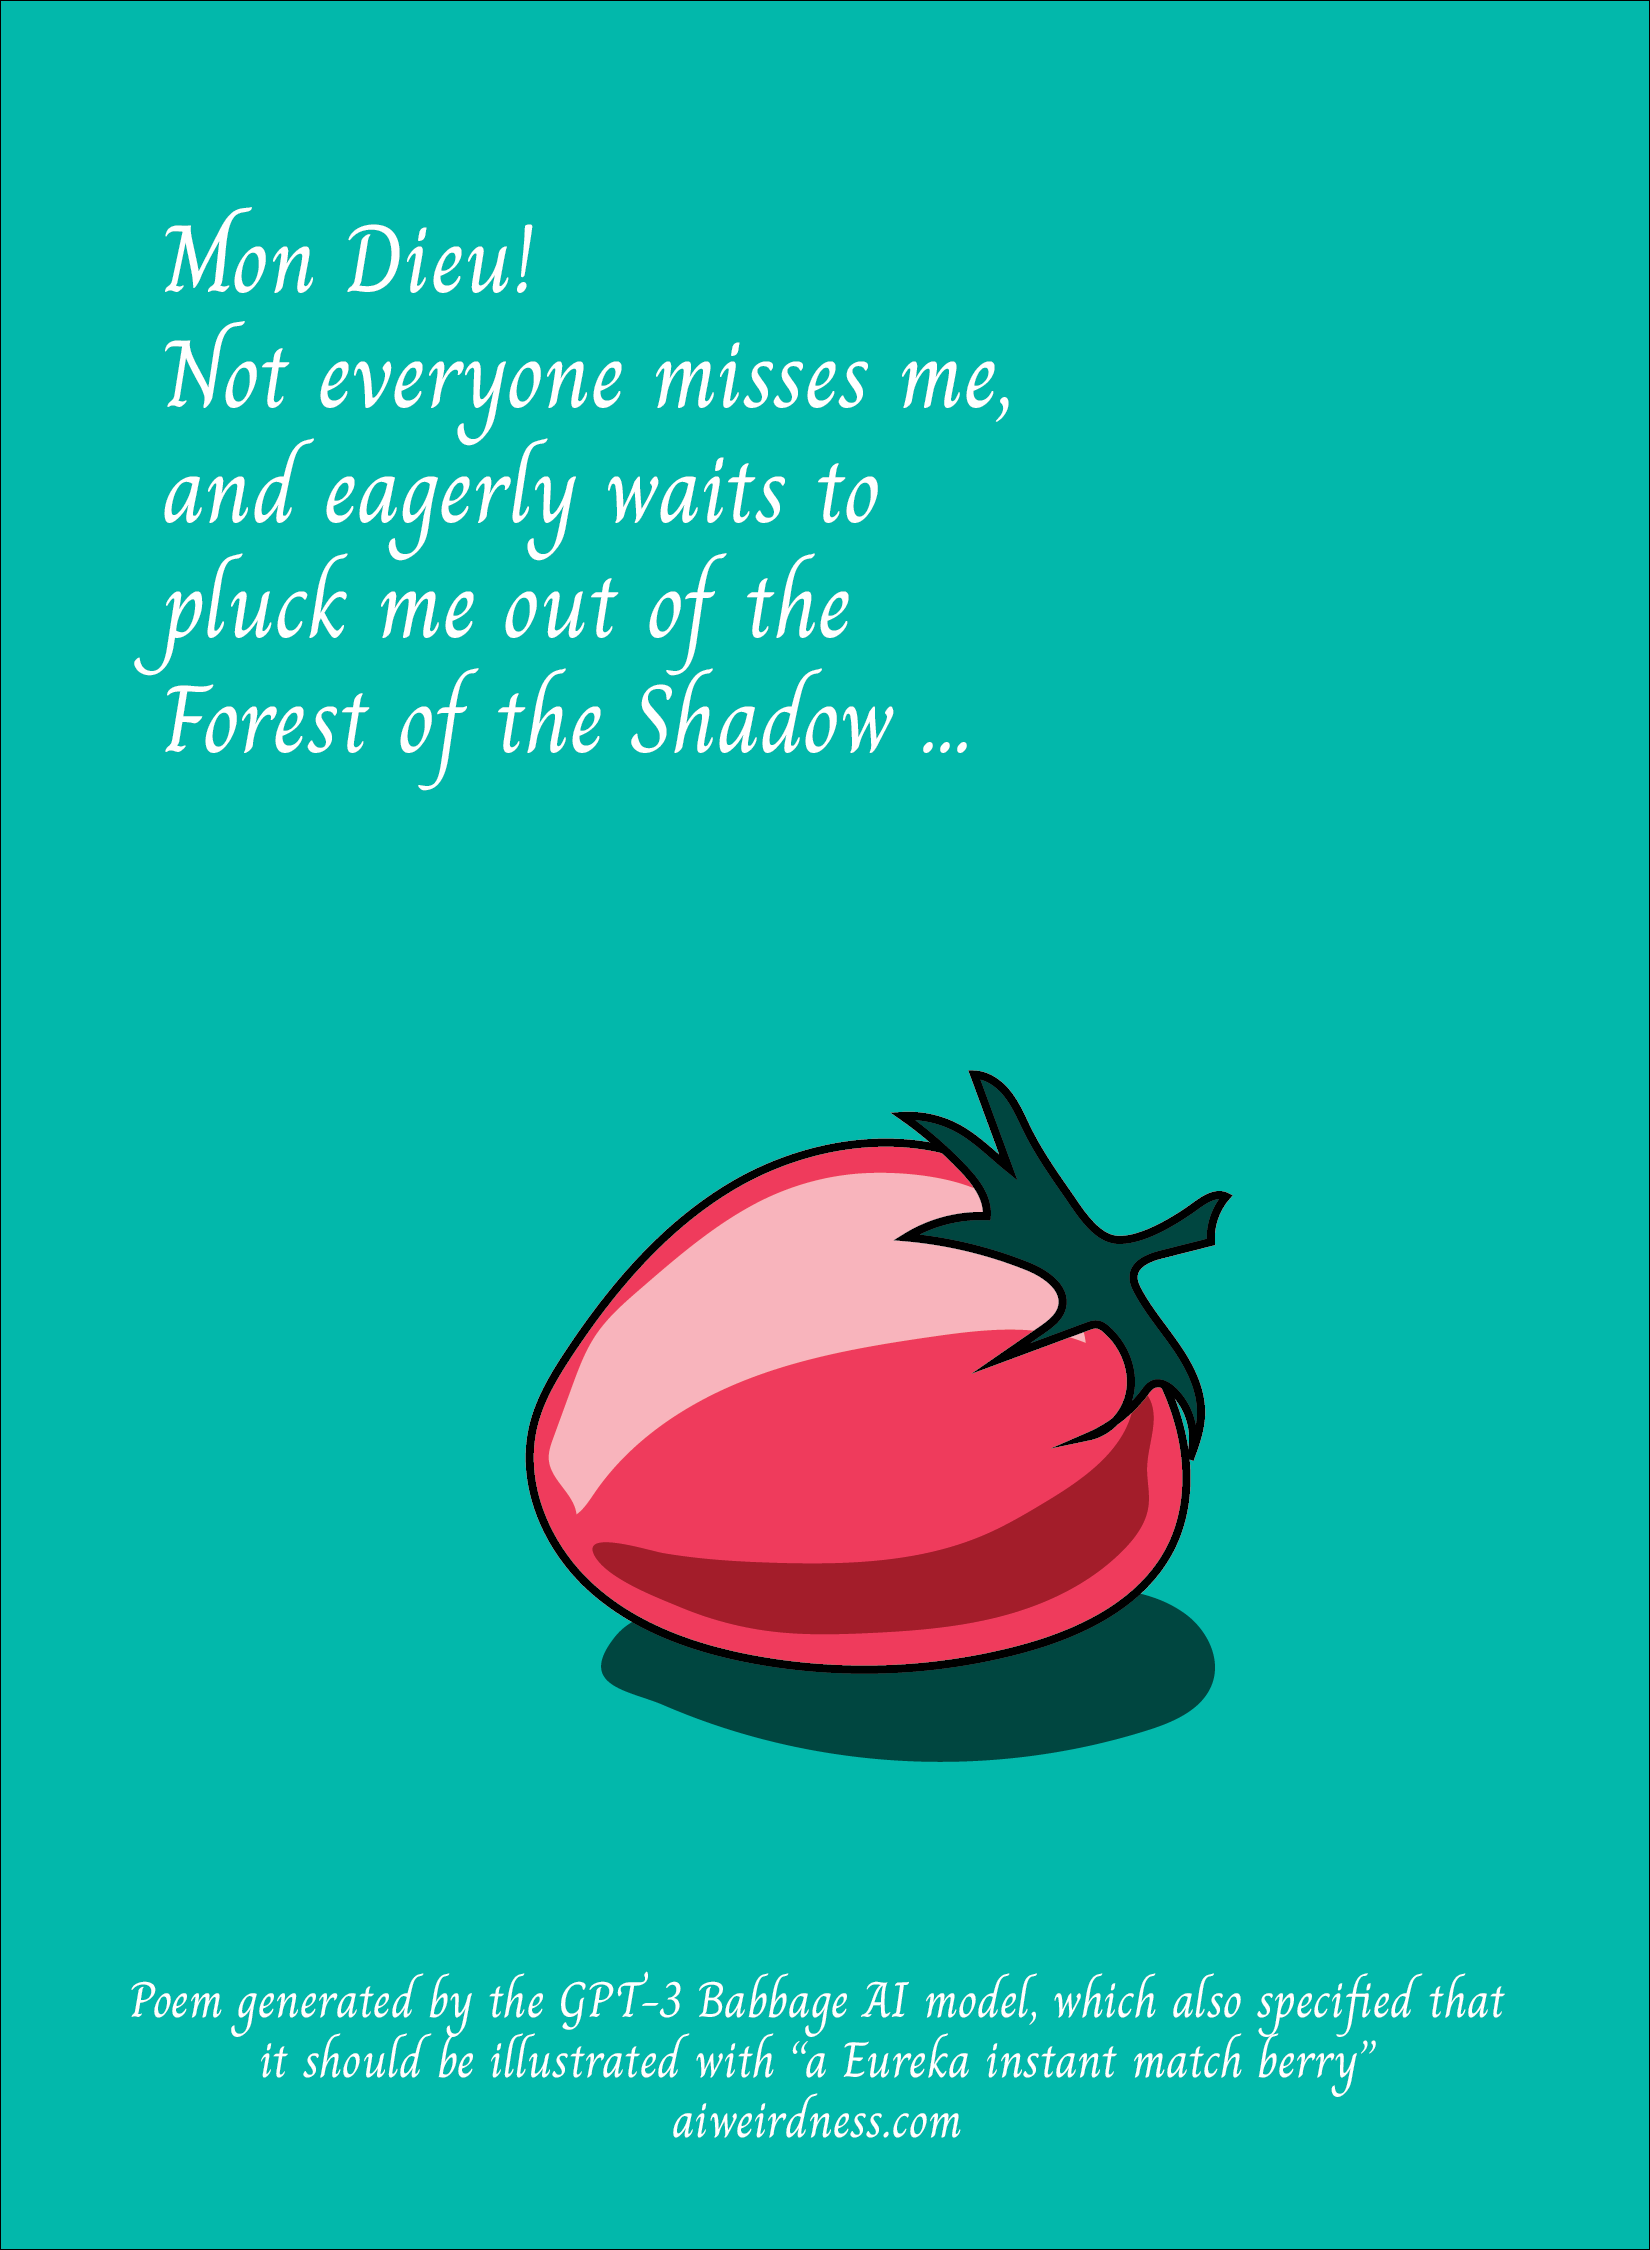 Mon Dieu! Not everyone misses me, and eagerly waits to pluck me out of the Forest of the Shadow. The Eureka Instant Match Berry is drawn as a very shiny red pink berry with a blueberry-like stem ...